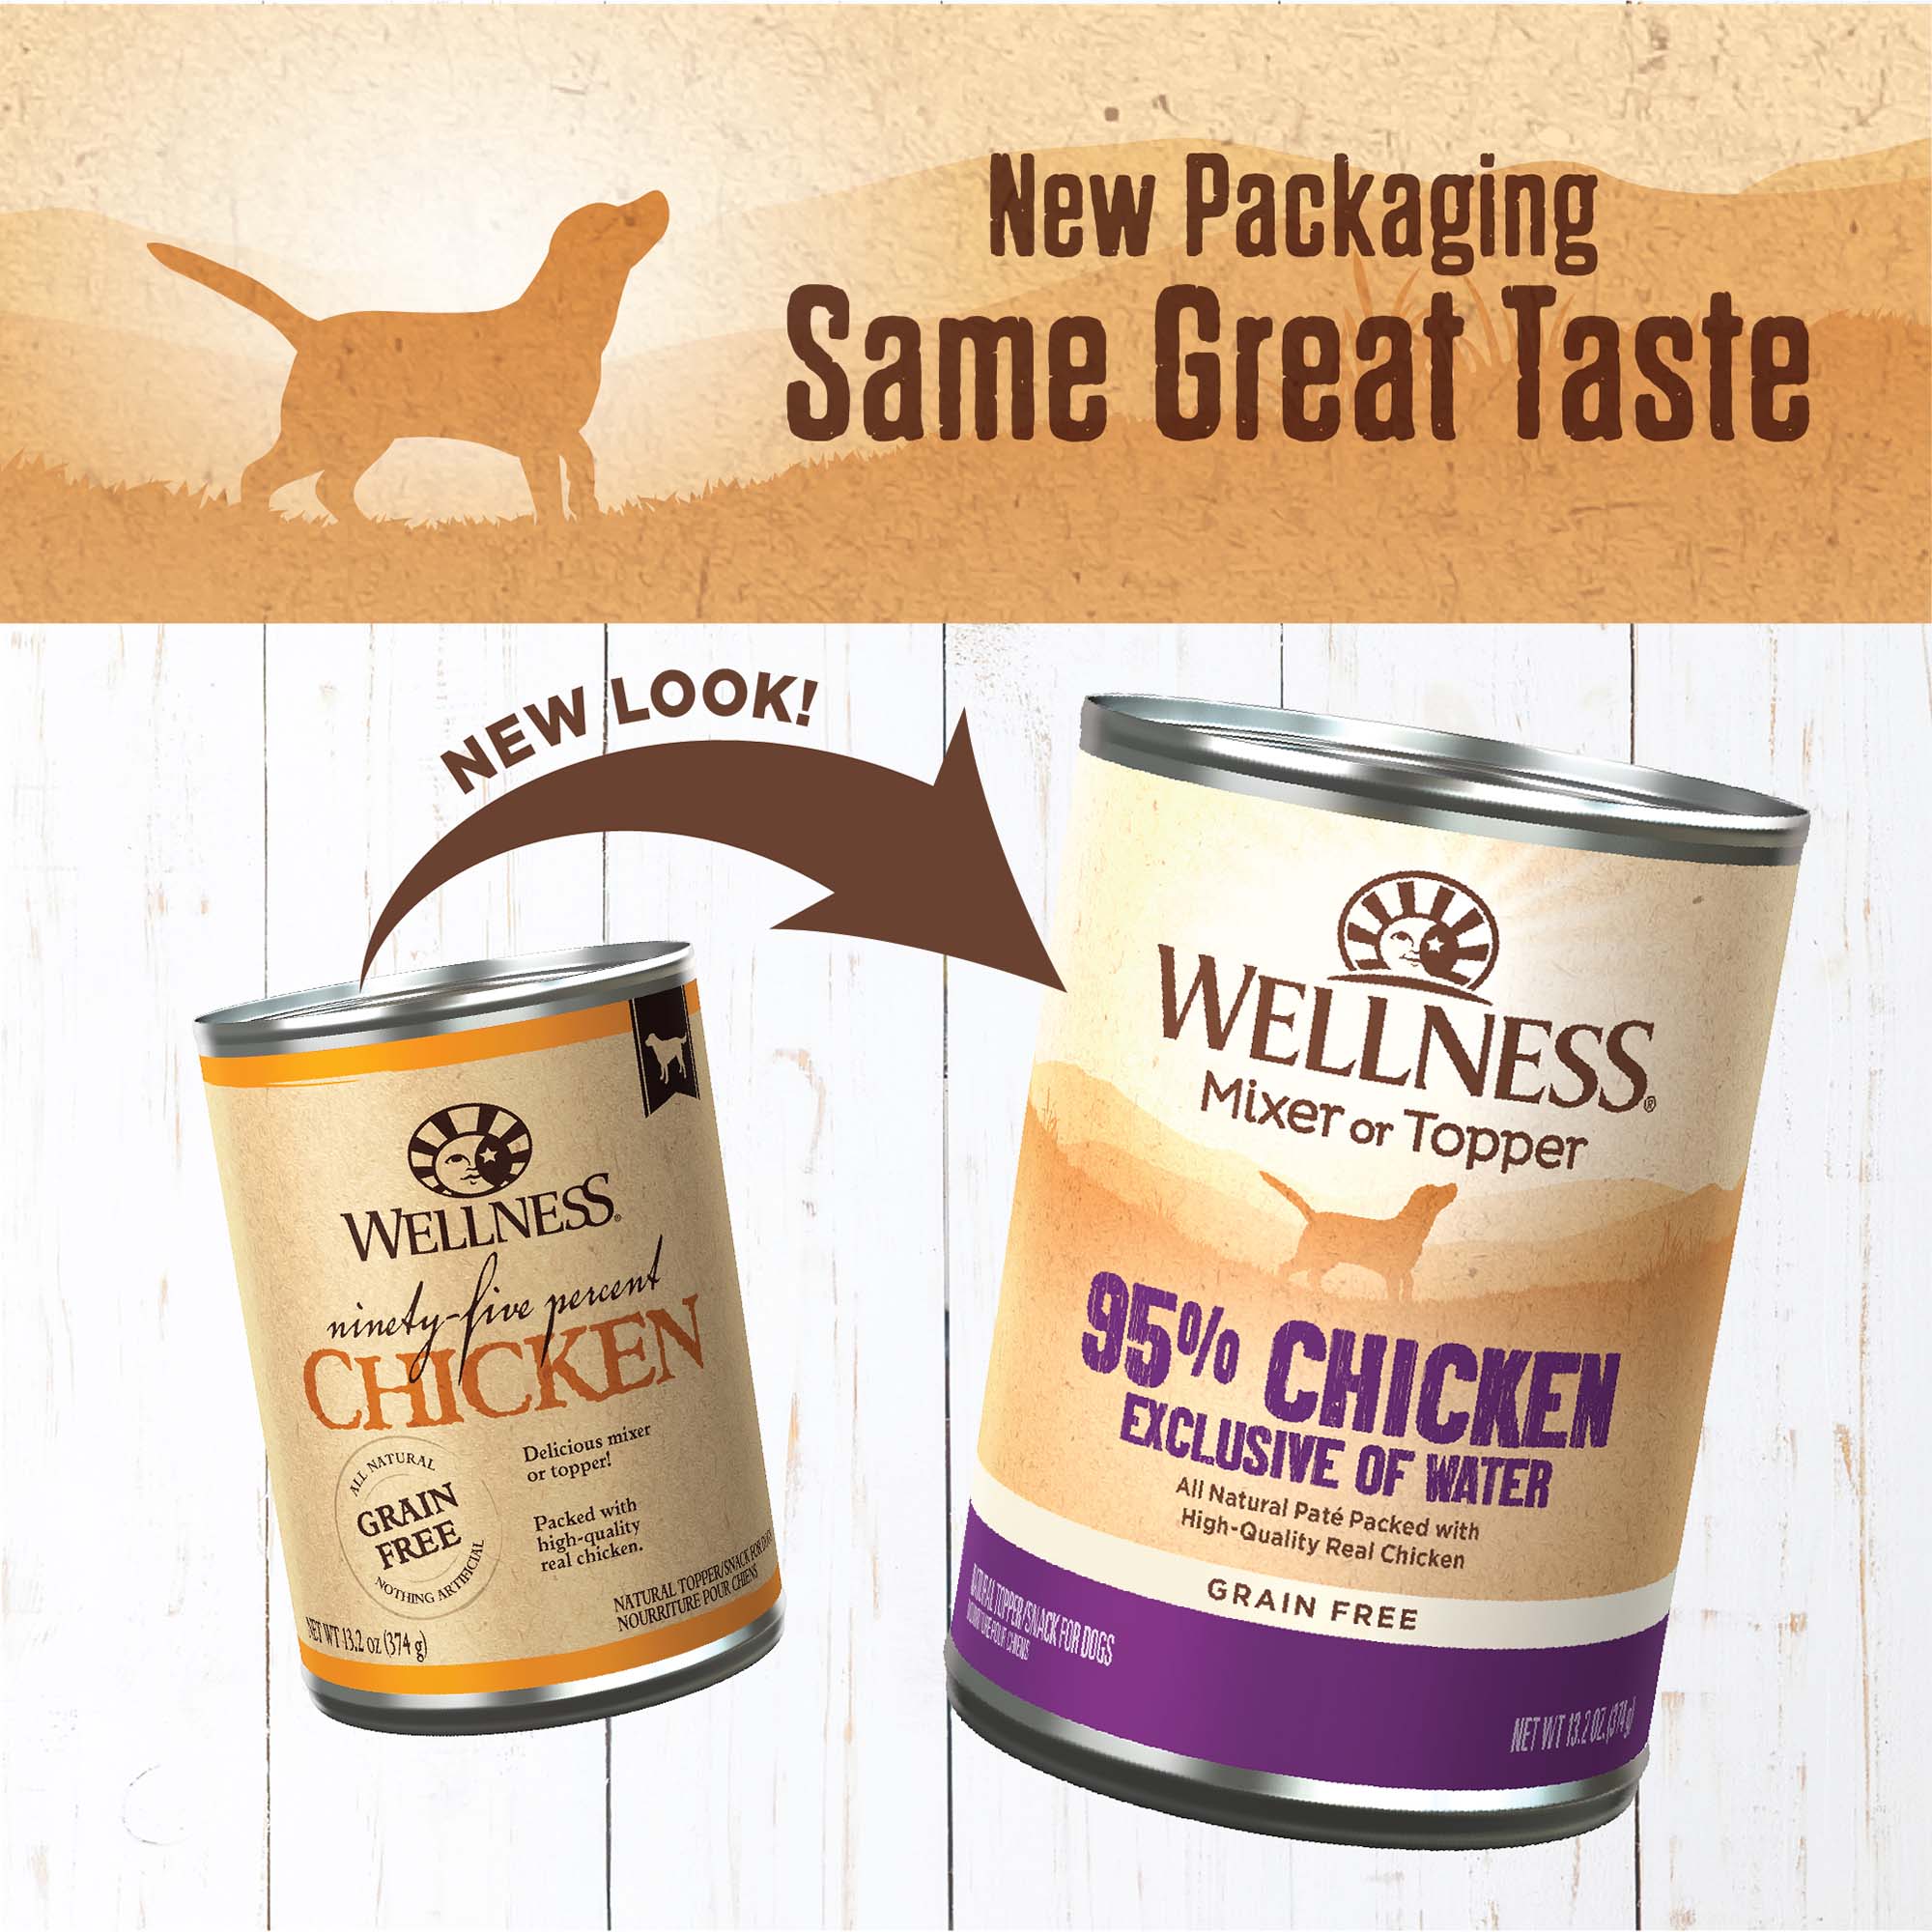 Wellness 95% Chicken Natural Wet Grain Free Canned Dog Food, 13.2-Ounce Can (Pack of 12) - image 4 of 7